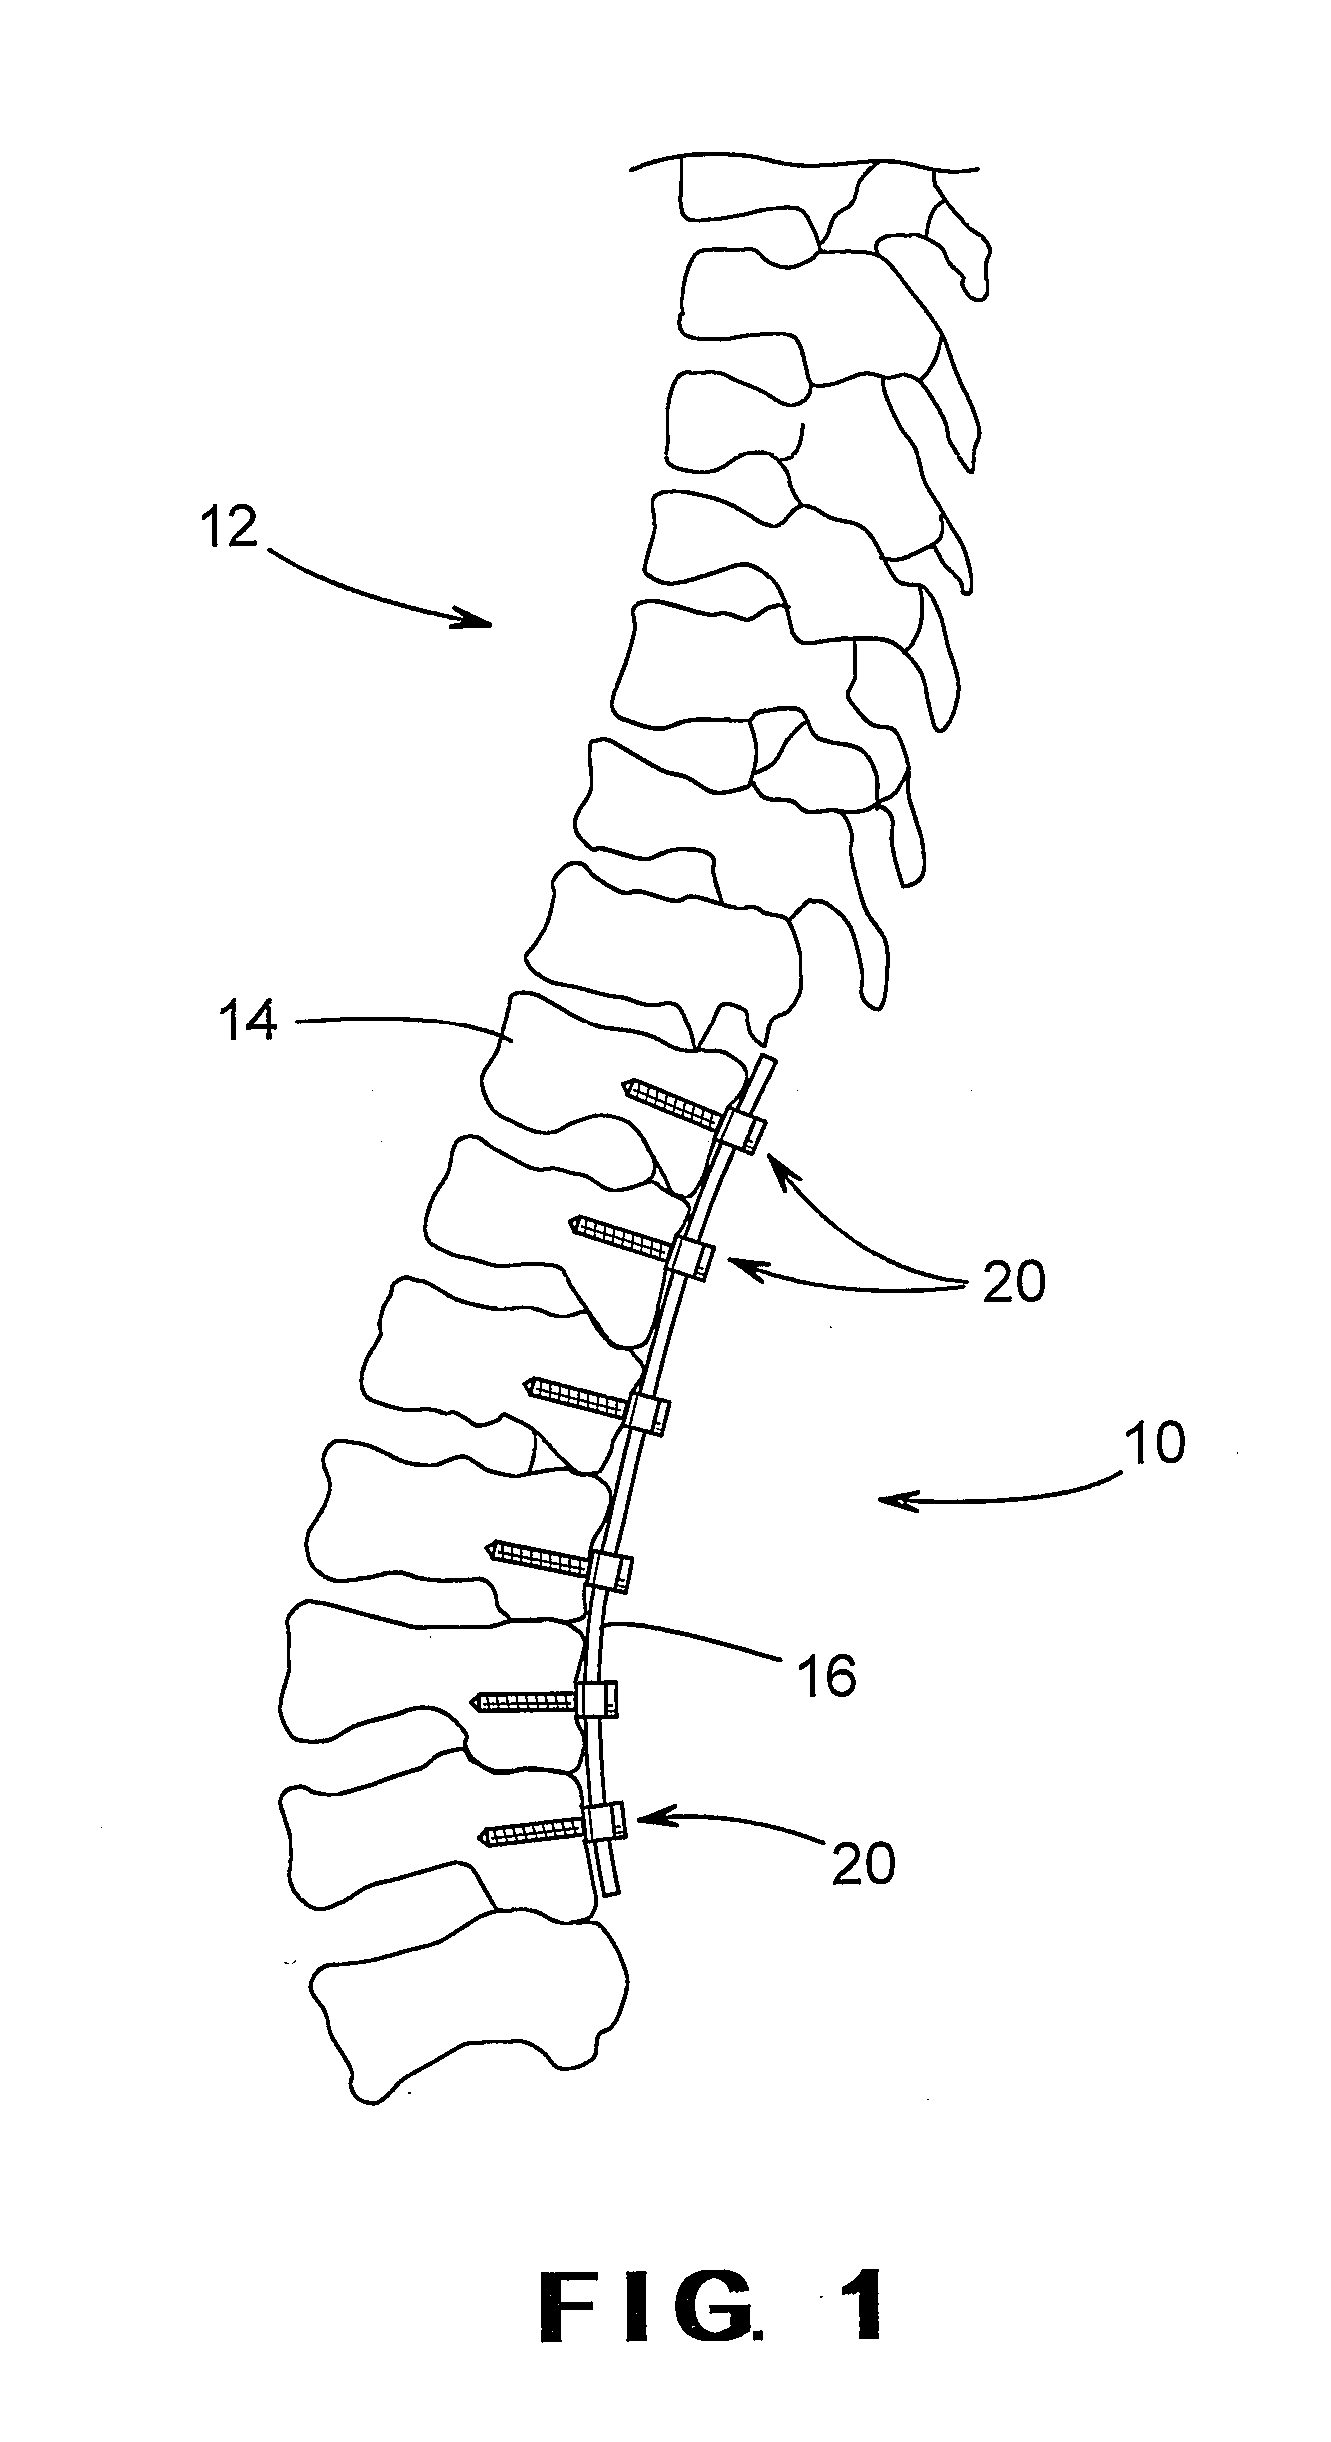 Pedicle screw including stationary and movable members for facilitating the surgical correction of spinal deformities